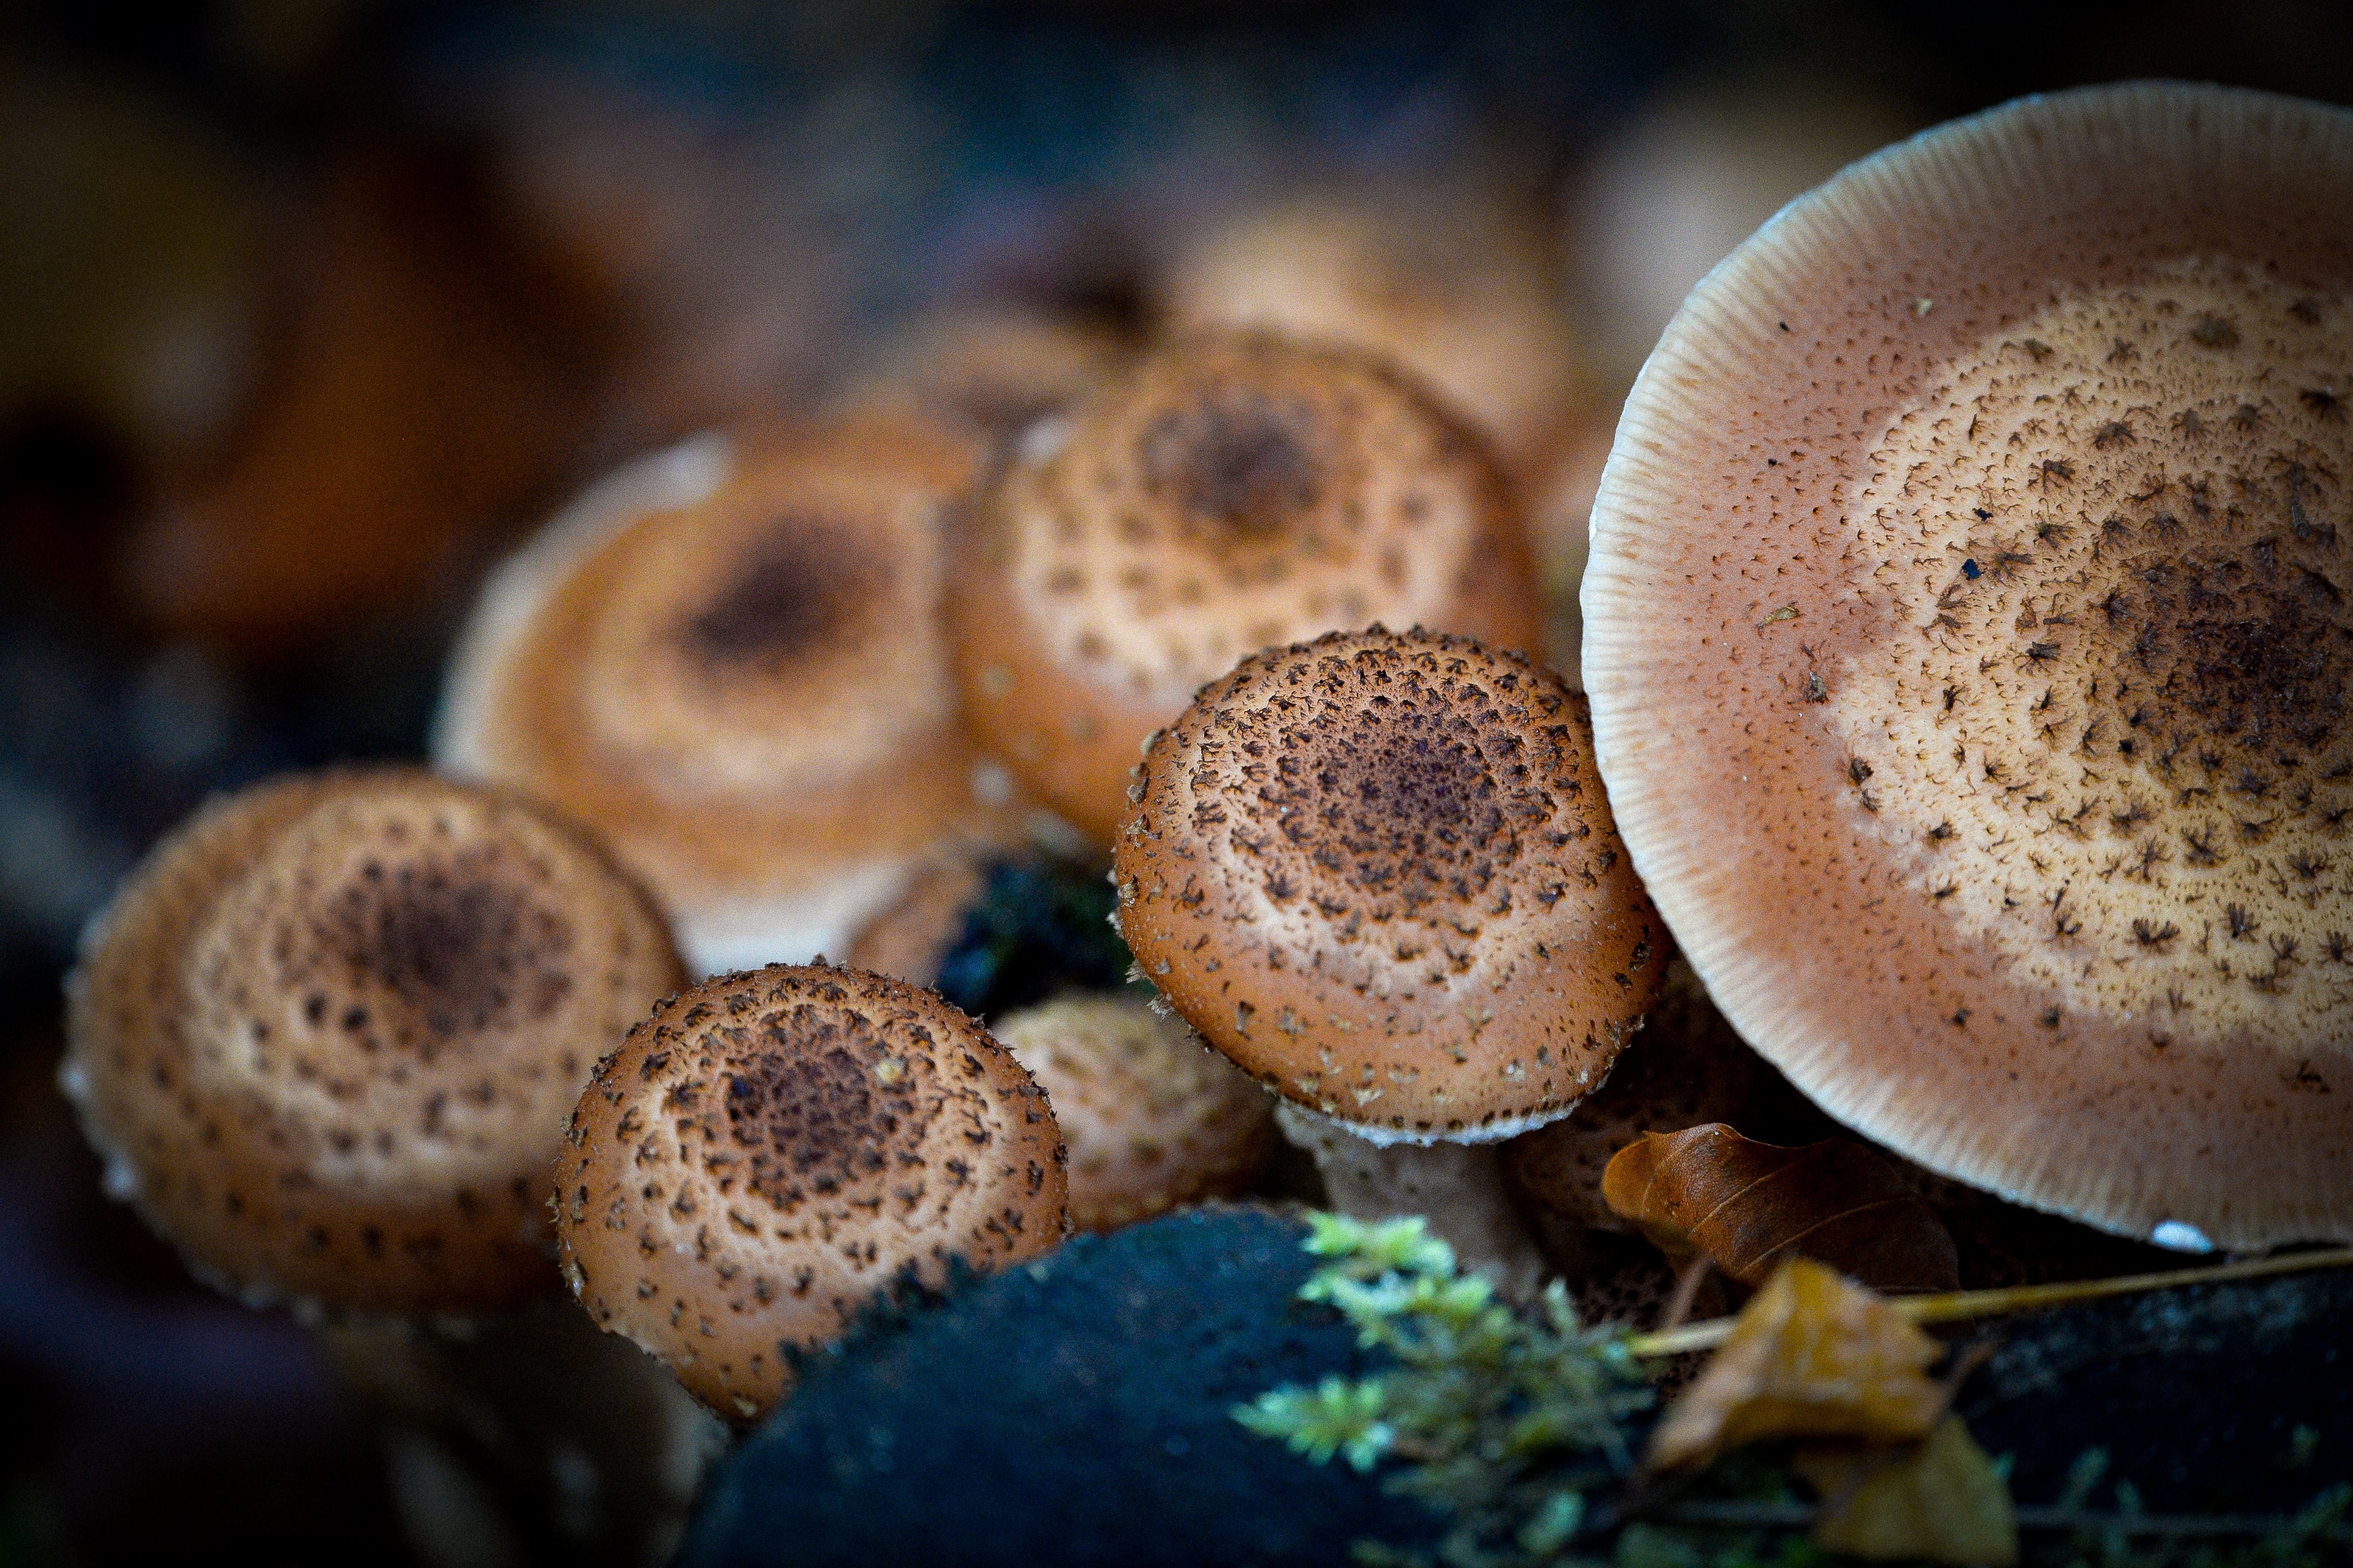 Largest Fungus In the World: A Fascinating Look At The Honey Mushroom